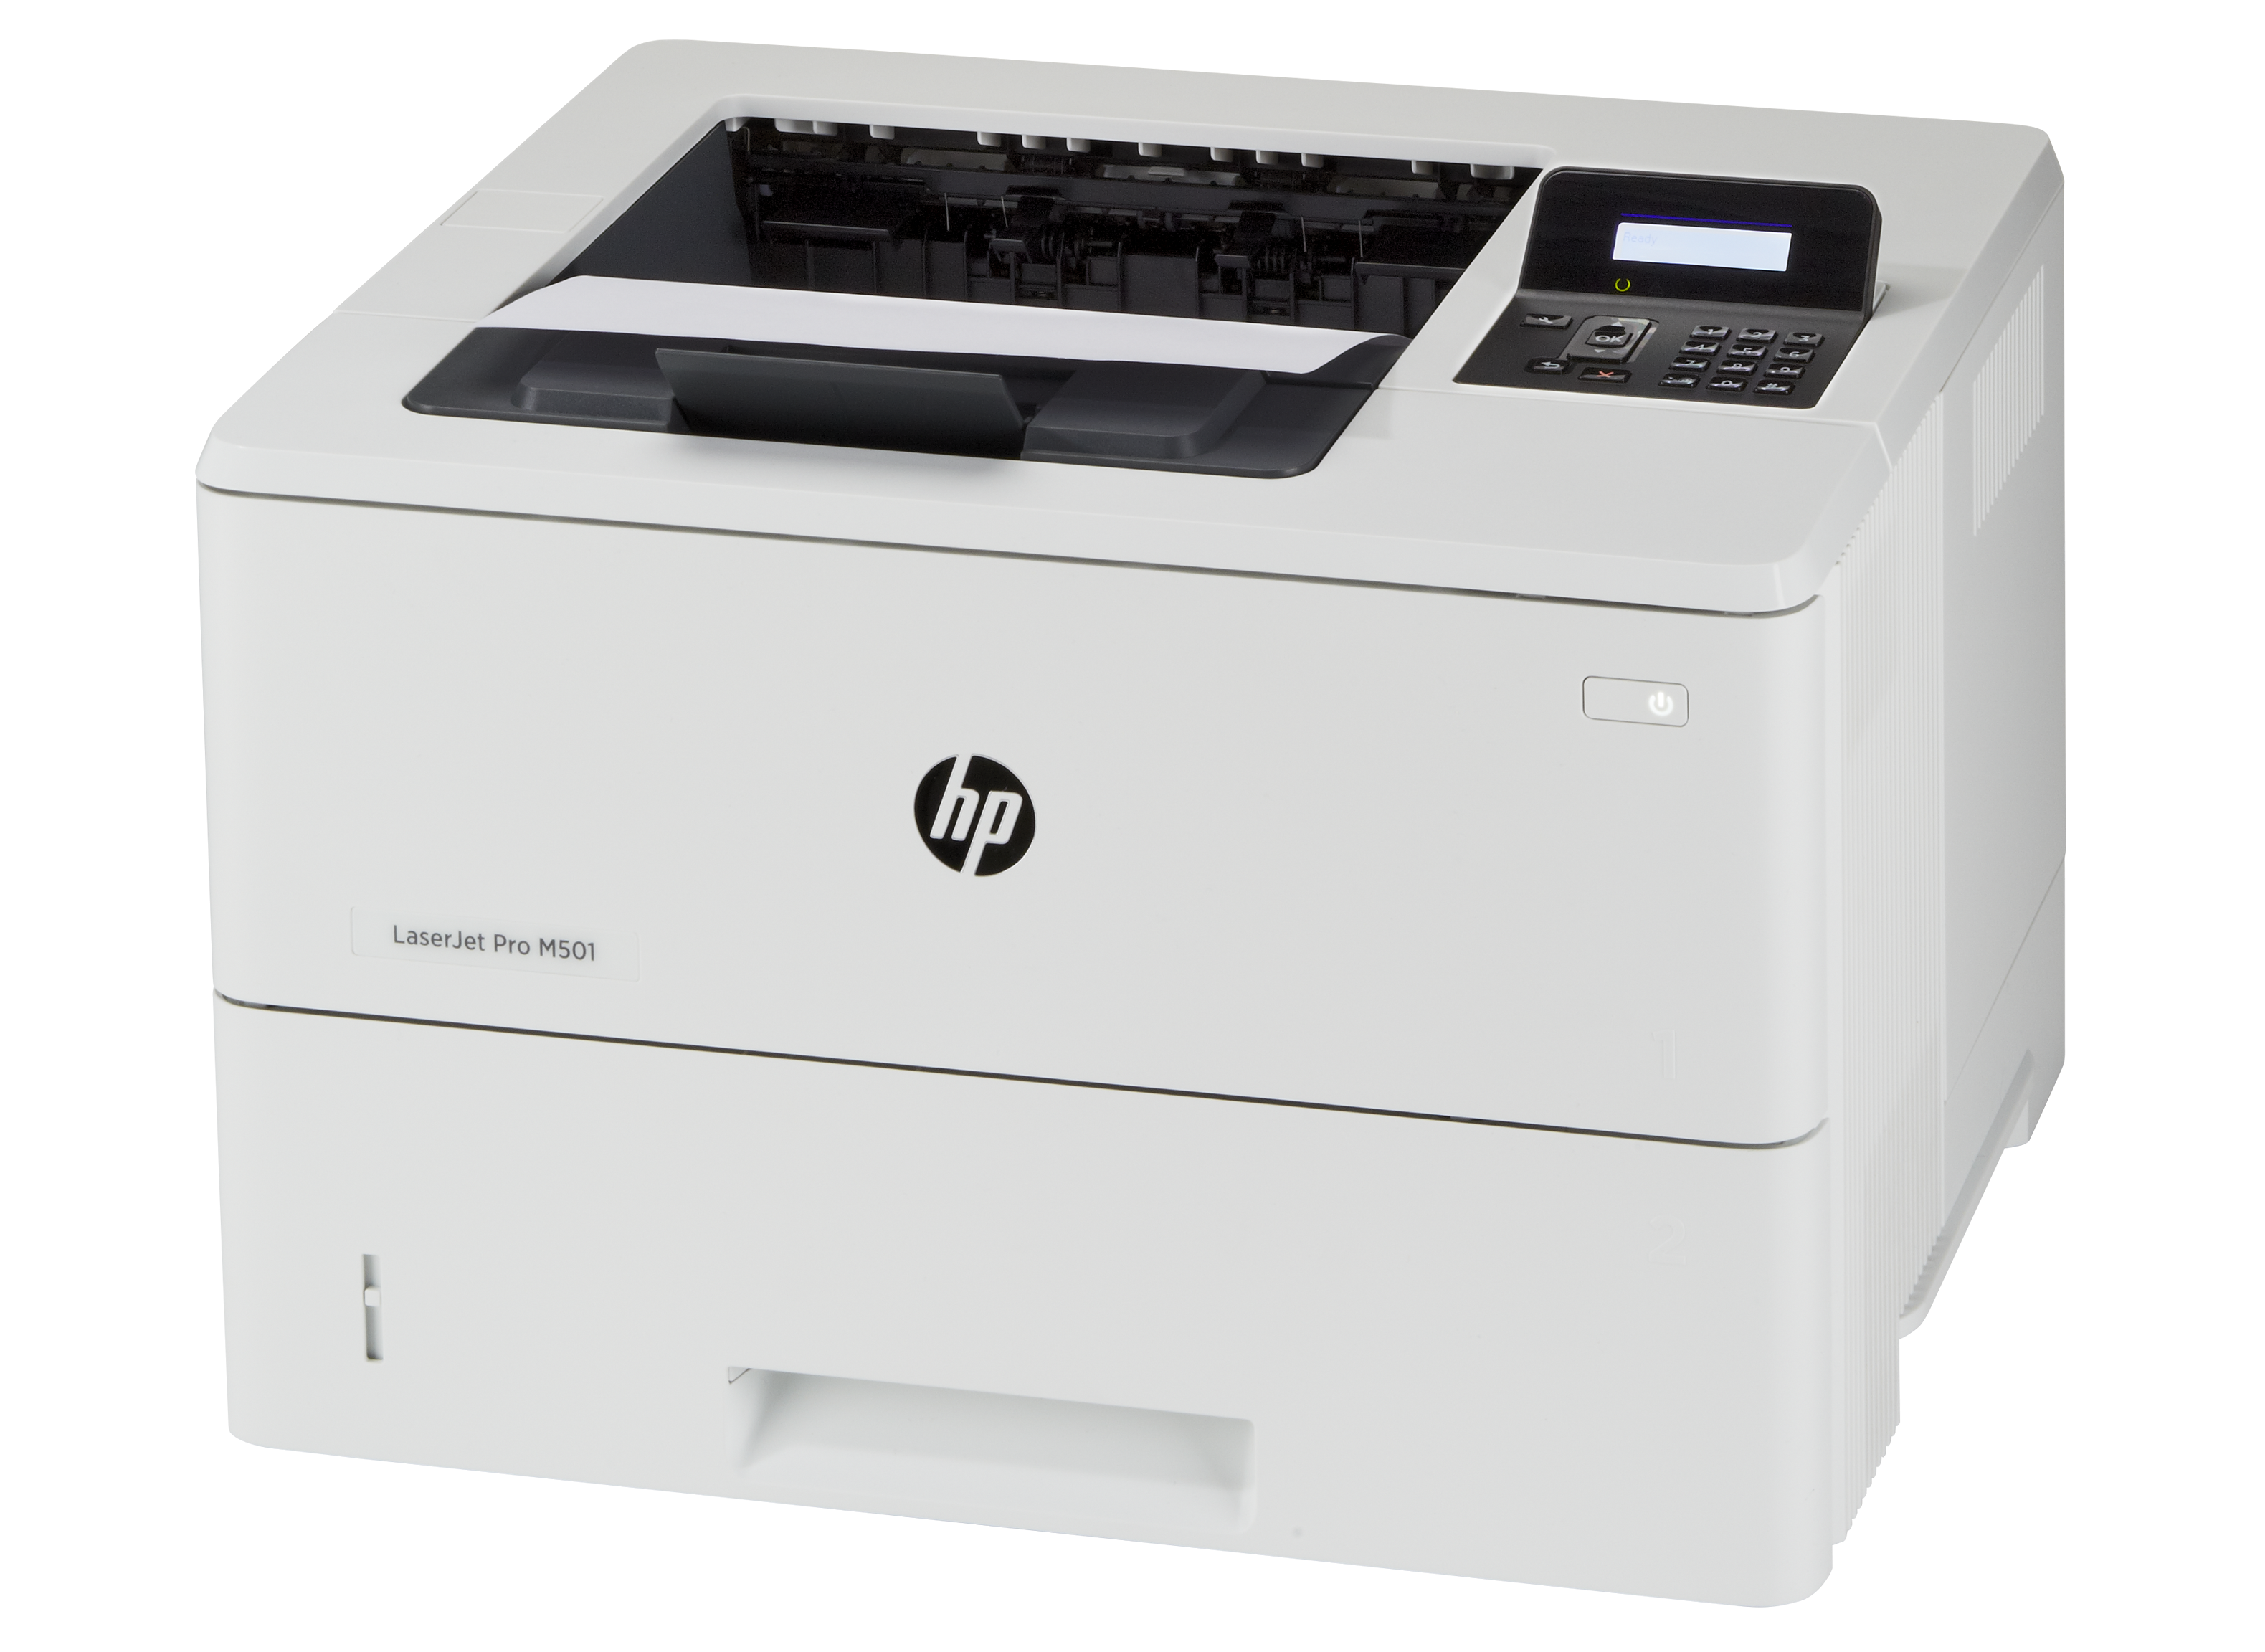 HP LaserJet Pro M501dn Printer Review - Consumer Reports